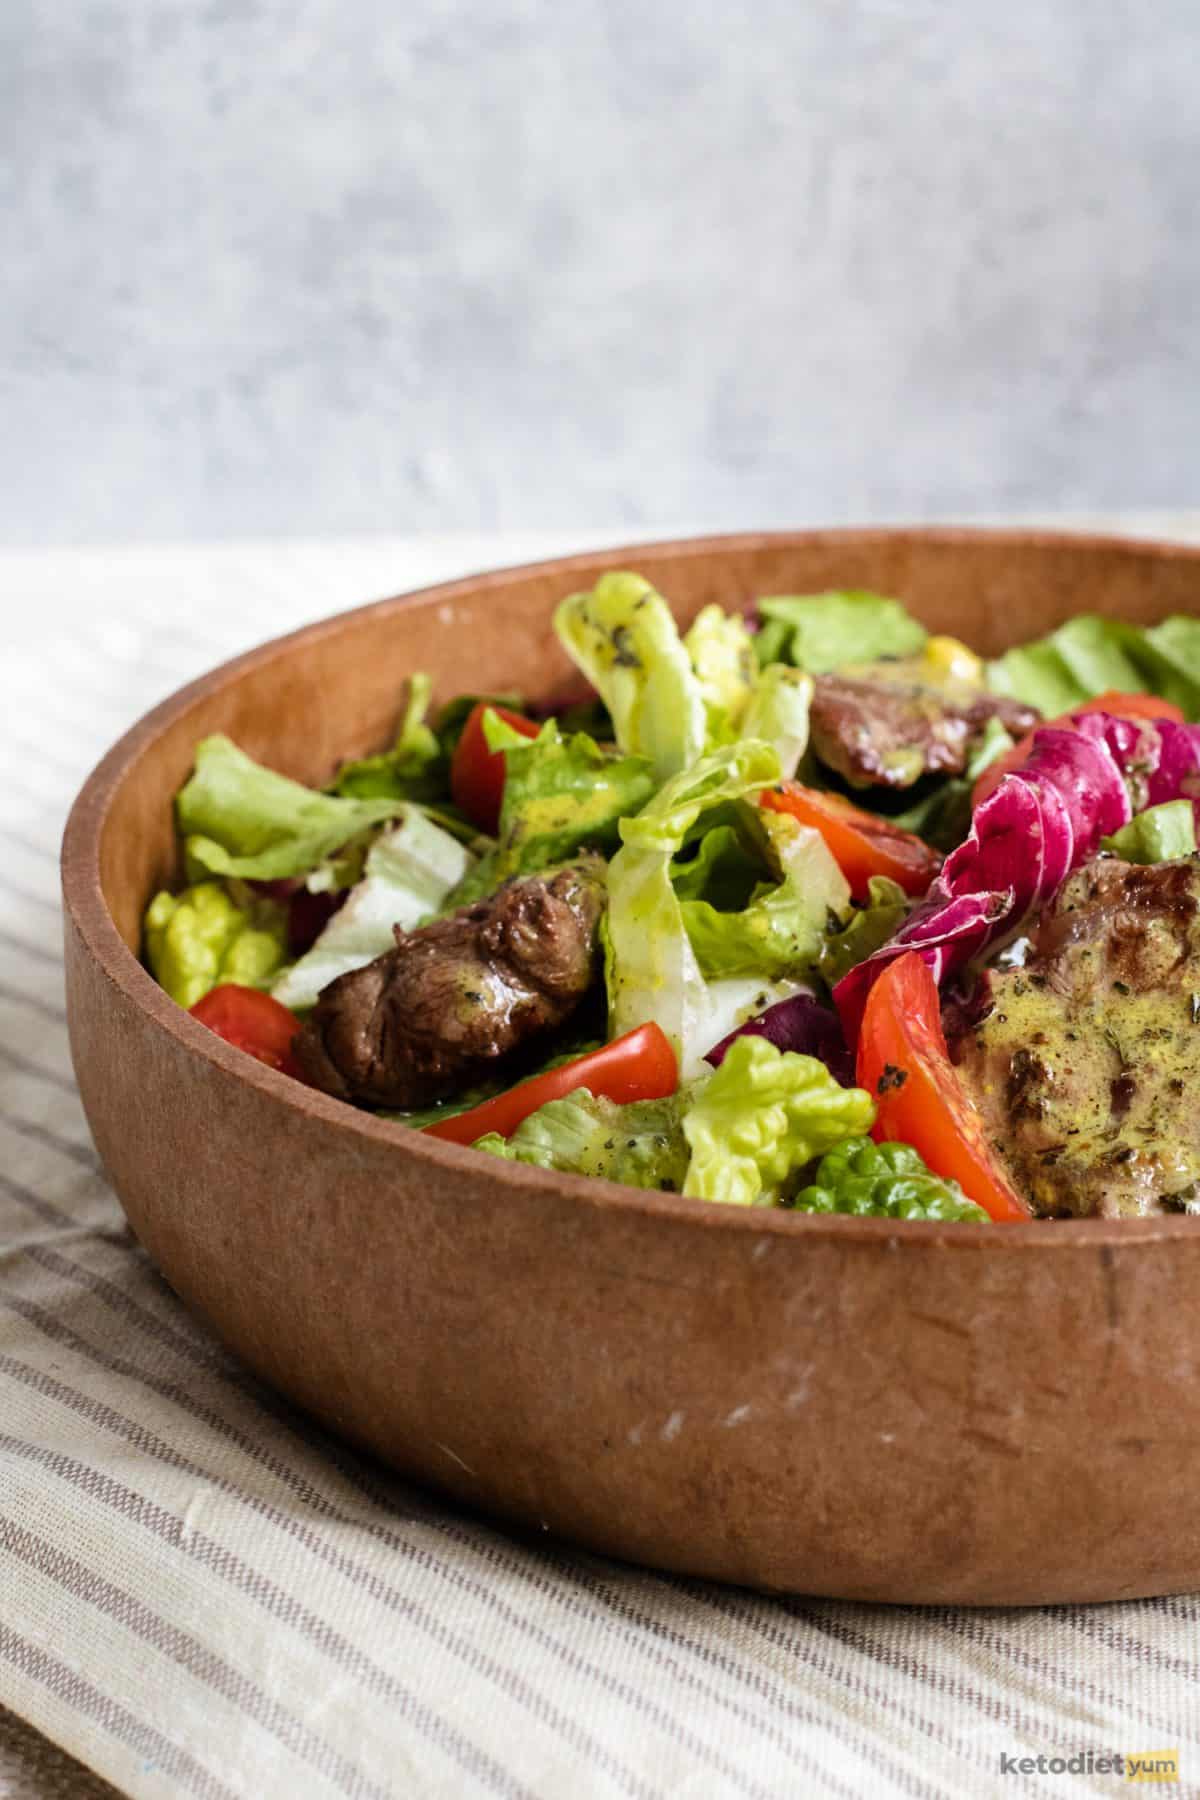 Low carb steak salad in a bowl with sirloin steak, mixed greens and drizzled with a lemon basil vinaigrette